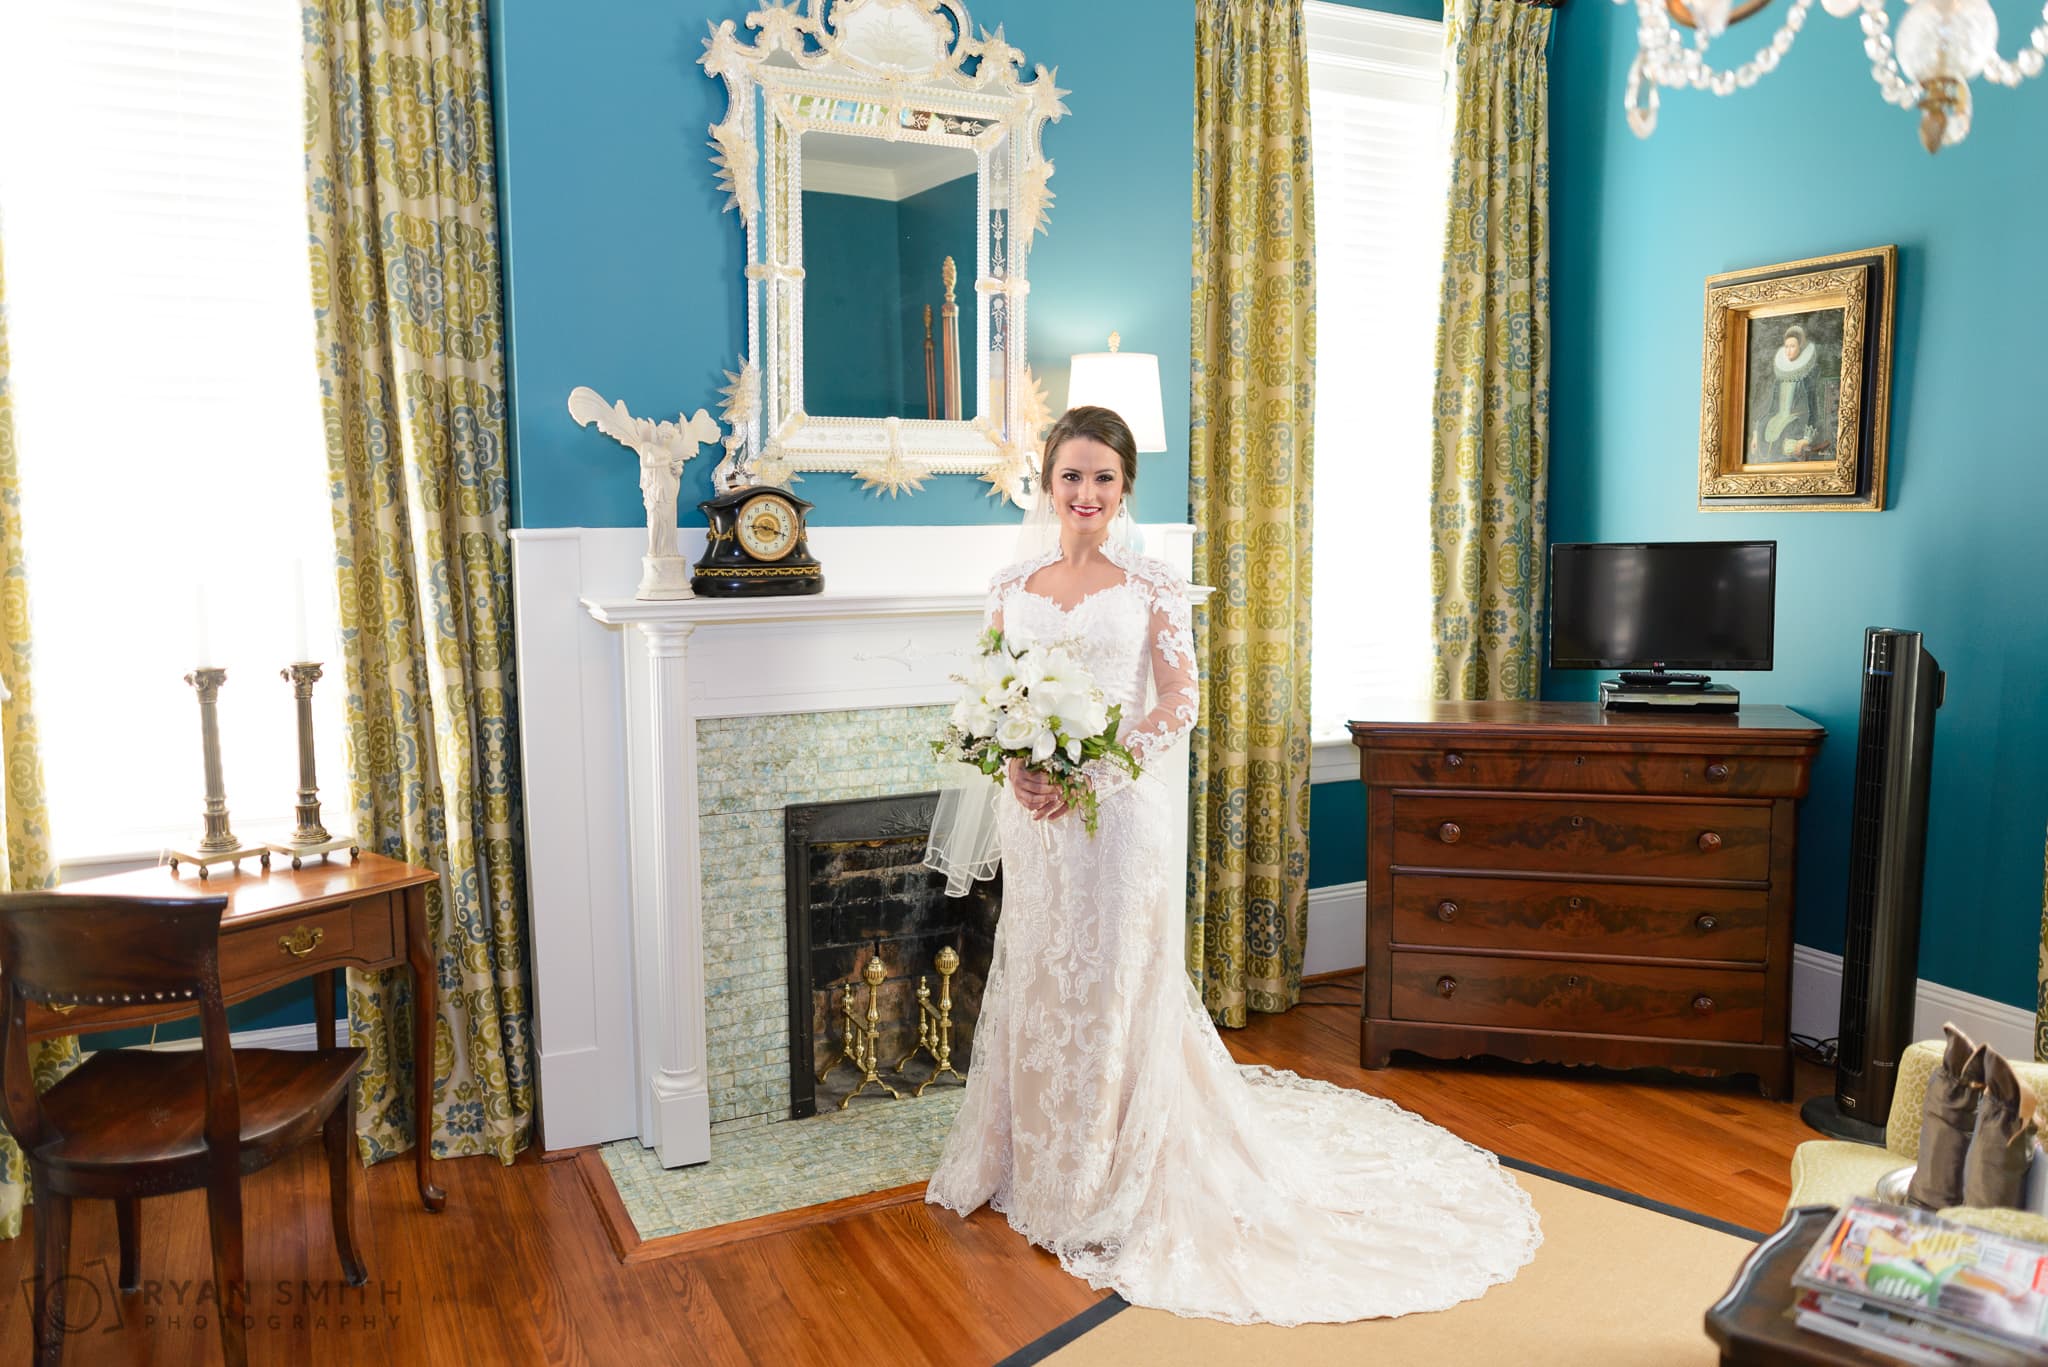 Bride by bedroom fireplace - Rosewood Manor, Marion